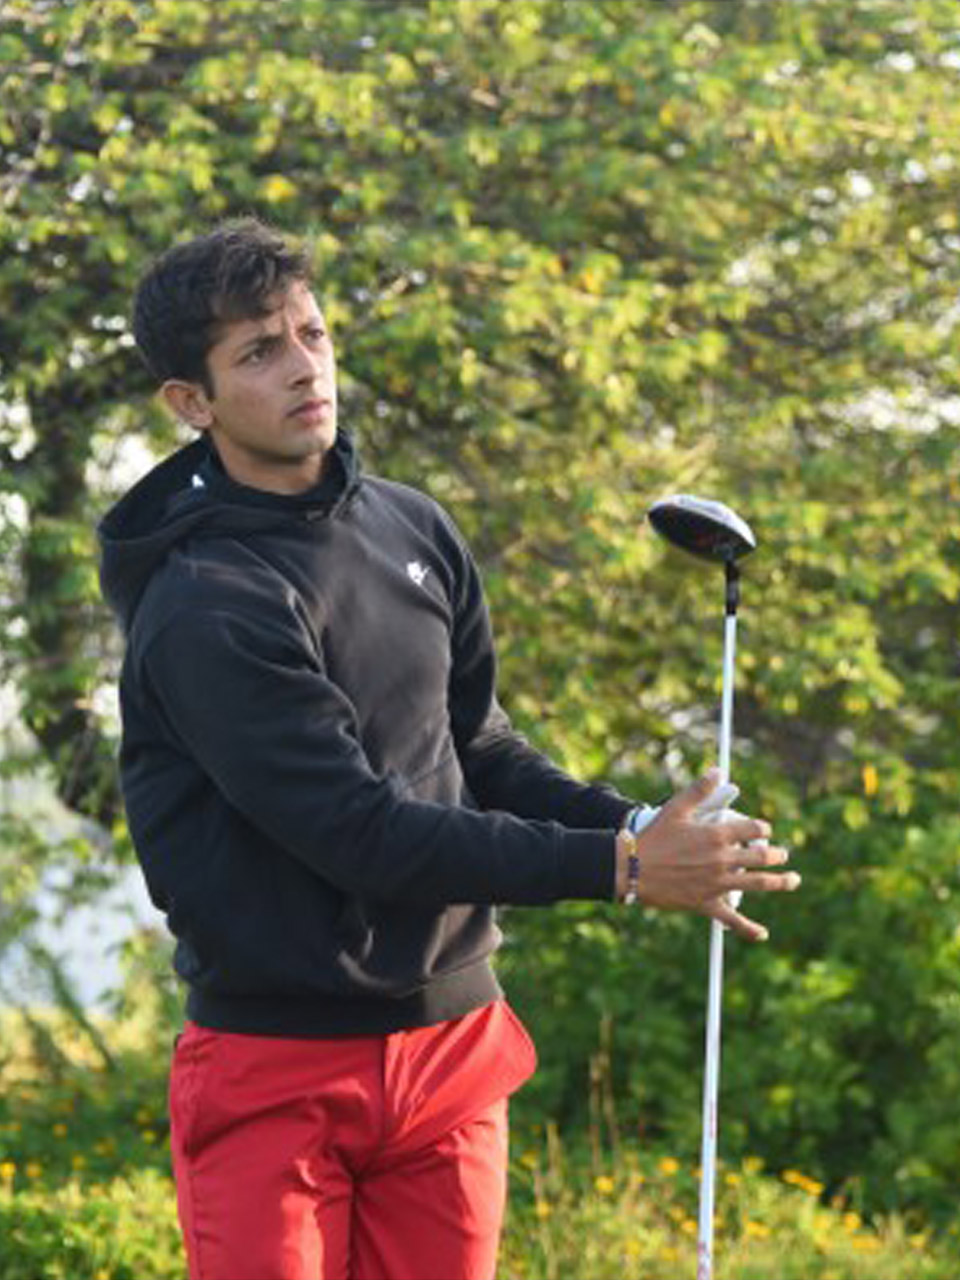 Sumit Kotwal finishes 4th at the Northern India Amateur Championship